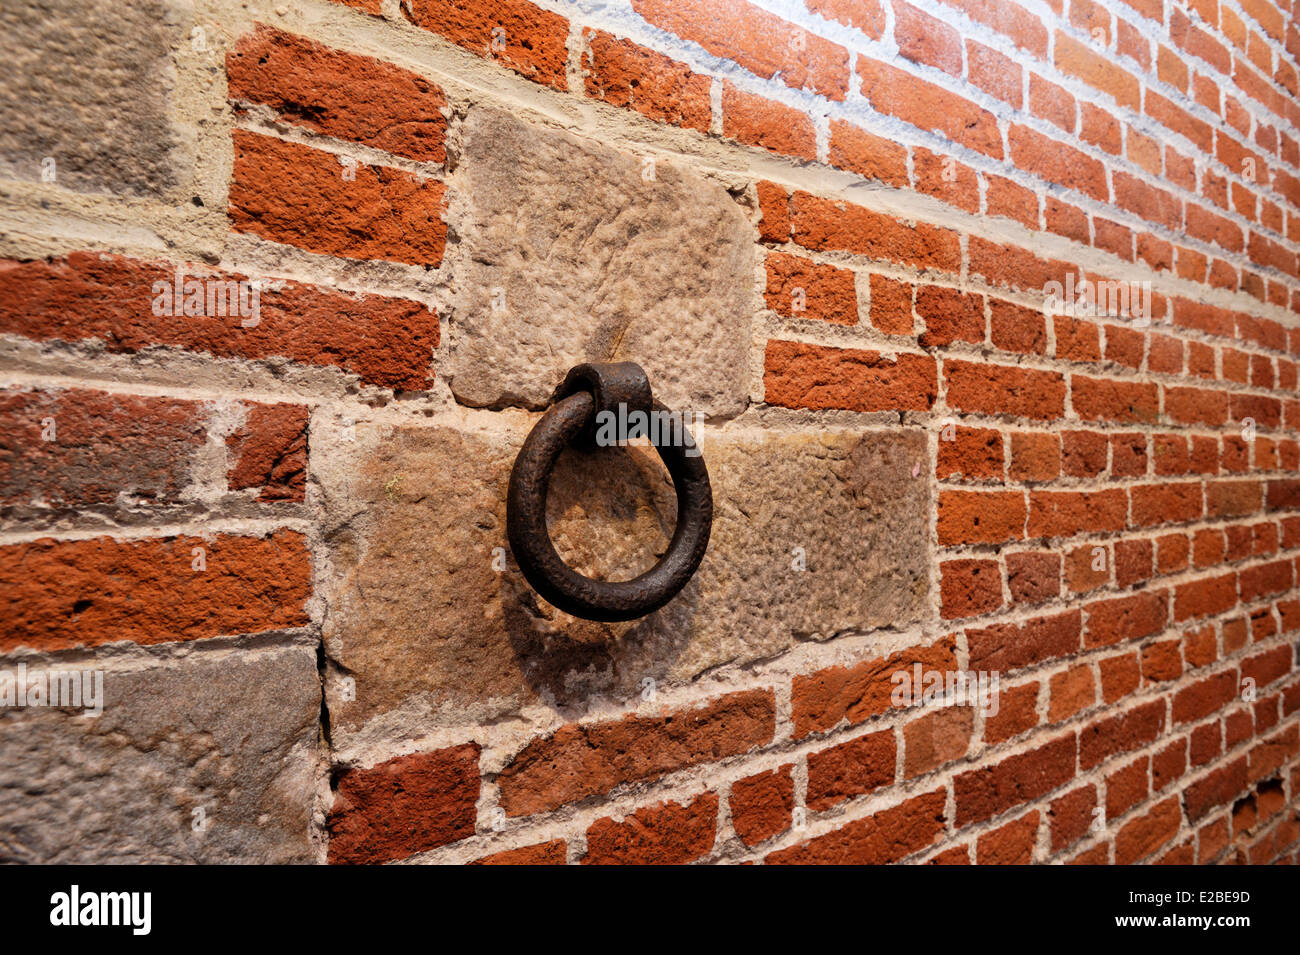 France, Nord, Douai, City Hall, ring sealed in one of the dungeons walls Stock Photo